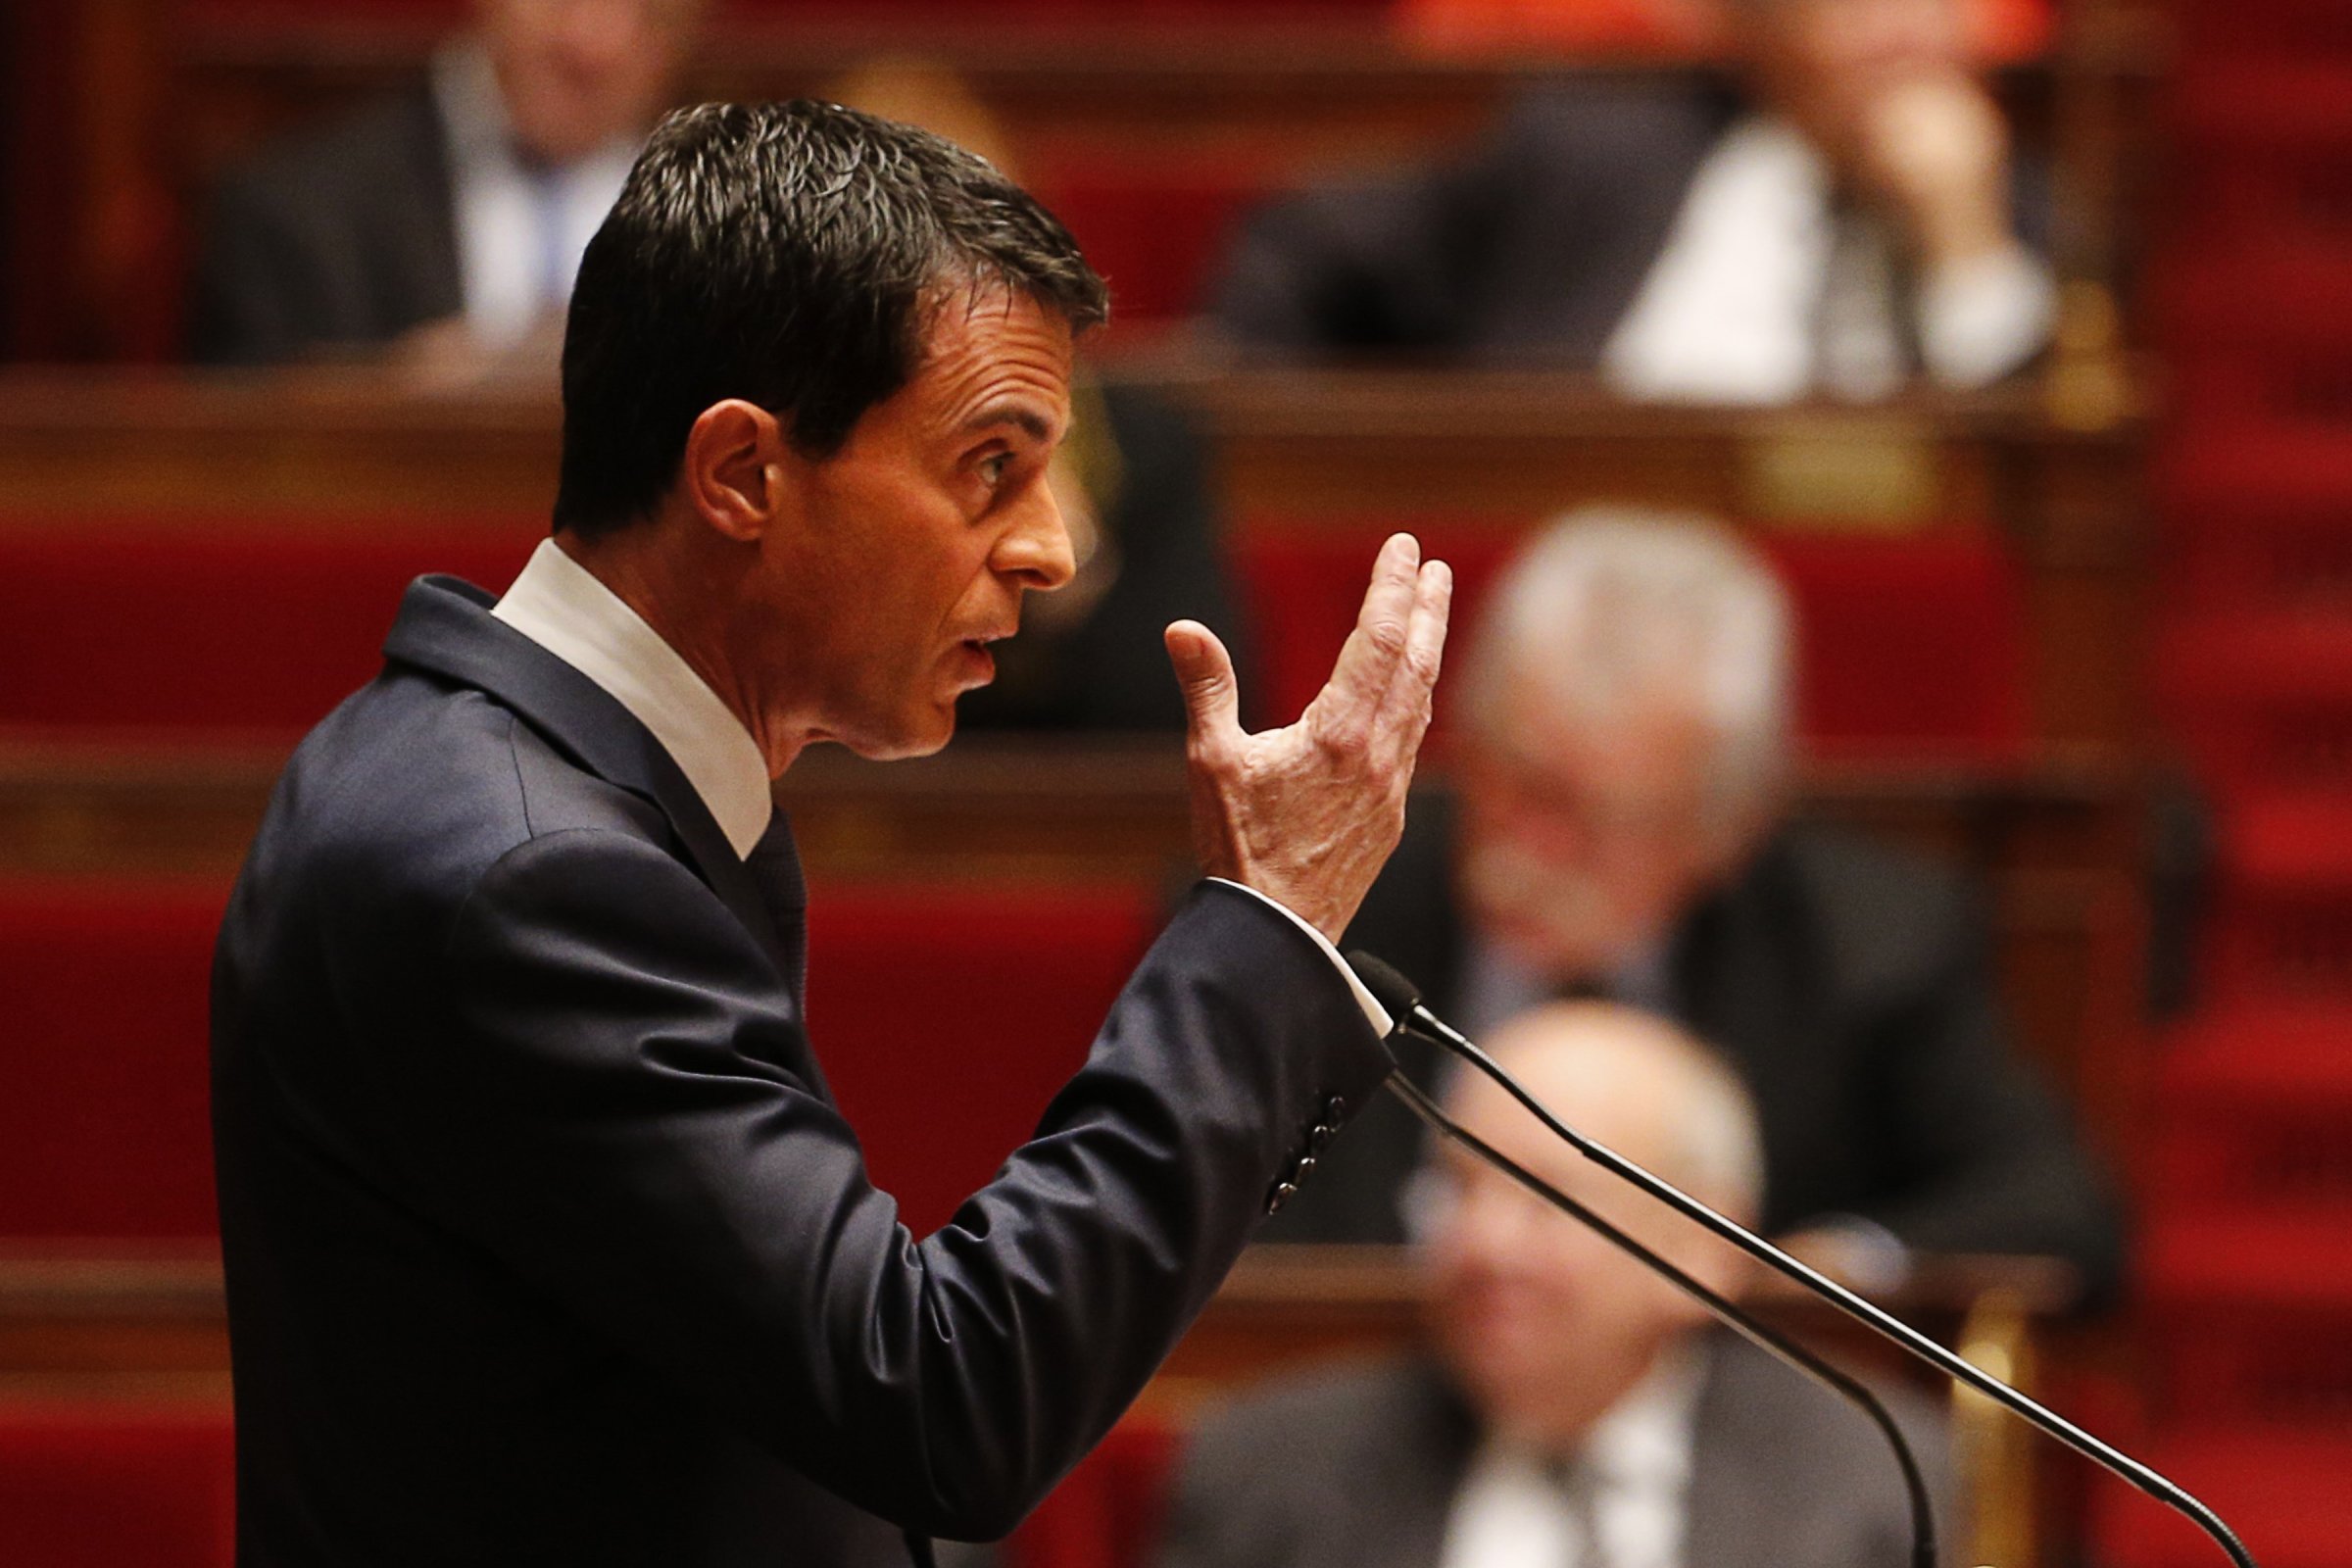 French Prime Minister Manuel Valls gestures as he addresses lawmakers debating a measure that would extend a state of emergency declared by the French president until the end of February, at the National Assembly in Paris on November 19, 2015.